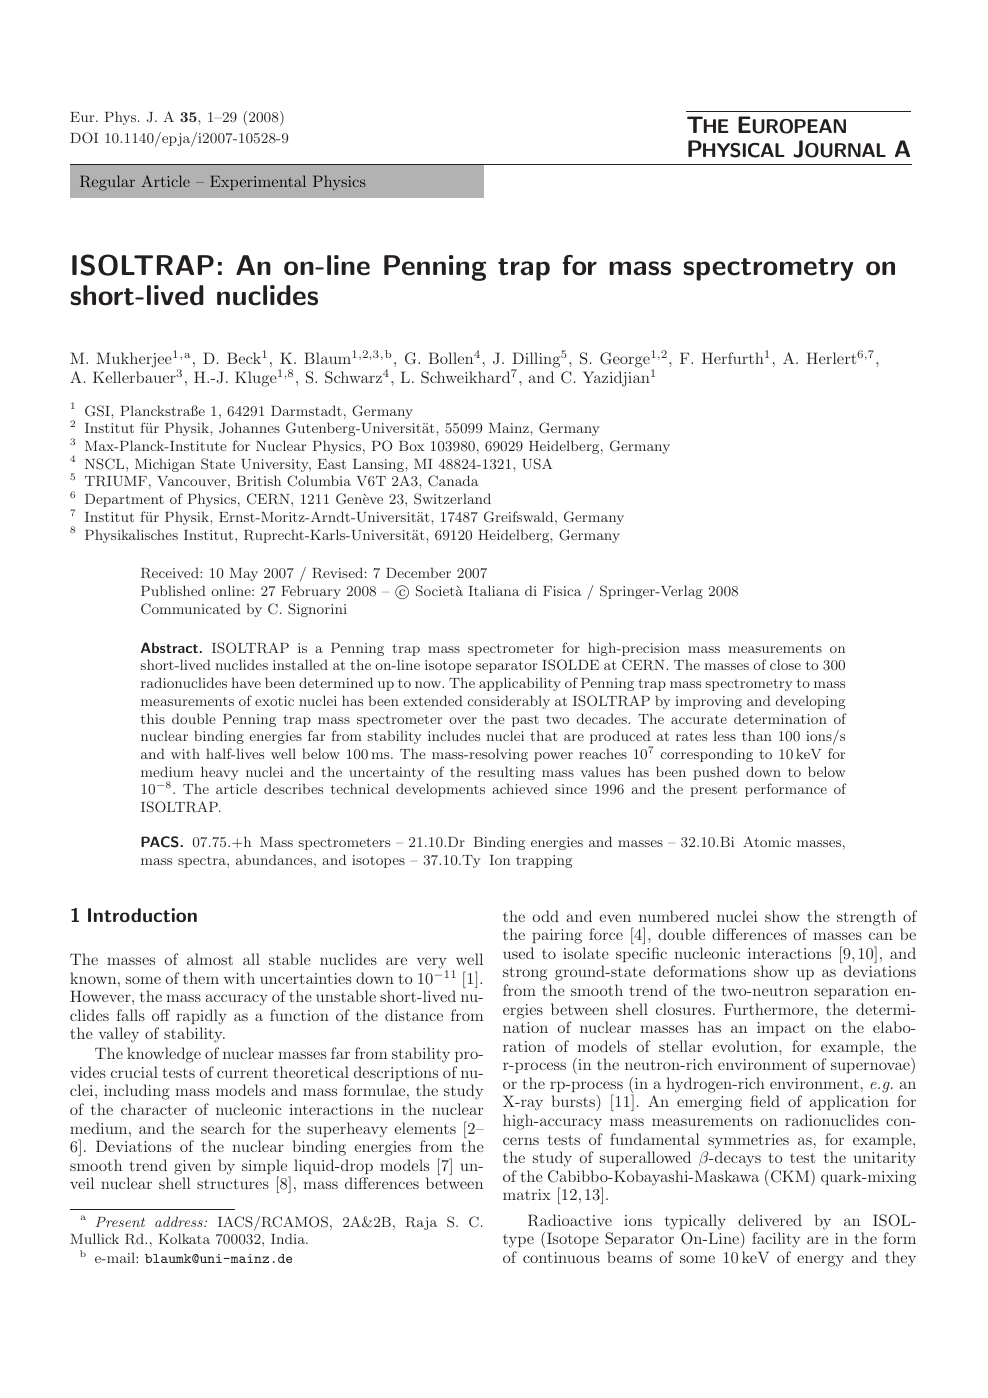 Isoltrap An On Line Penning Trap For Mass Spectrometry On Short Lived Nuclides Topic Of Research Paper In Physical Sciences Download Scholarly Article Pdf And Read For Free On Cyberleninka Open Science Hub